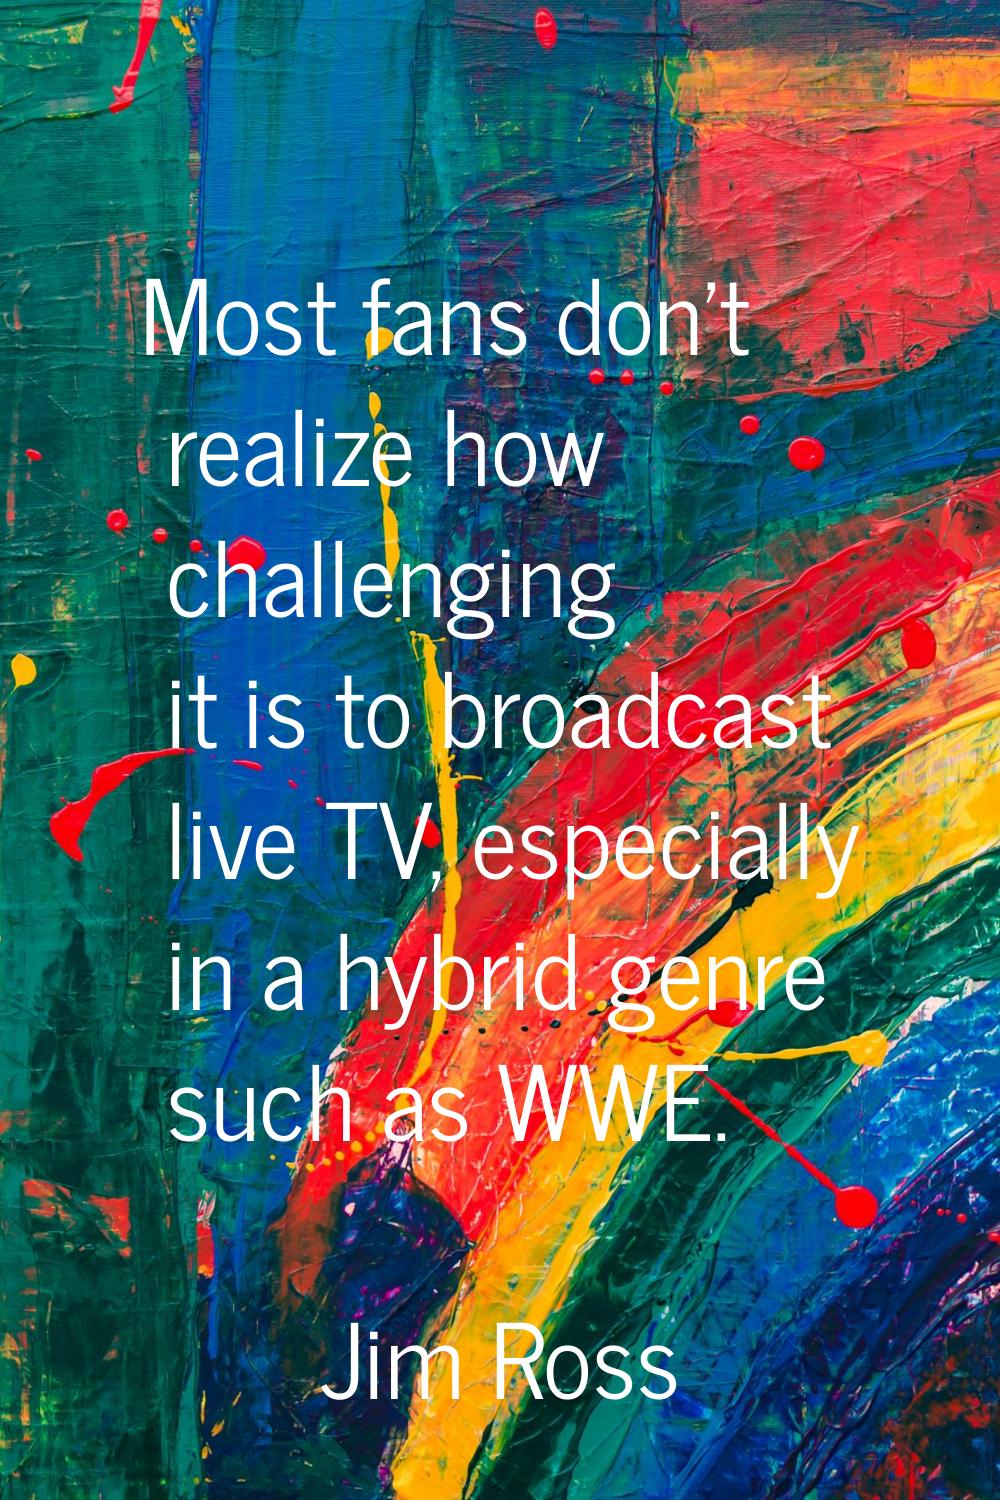 Most fans don't realize how challenging it is to broadcast live TV, especially in a hybrid genre su